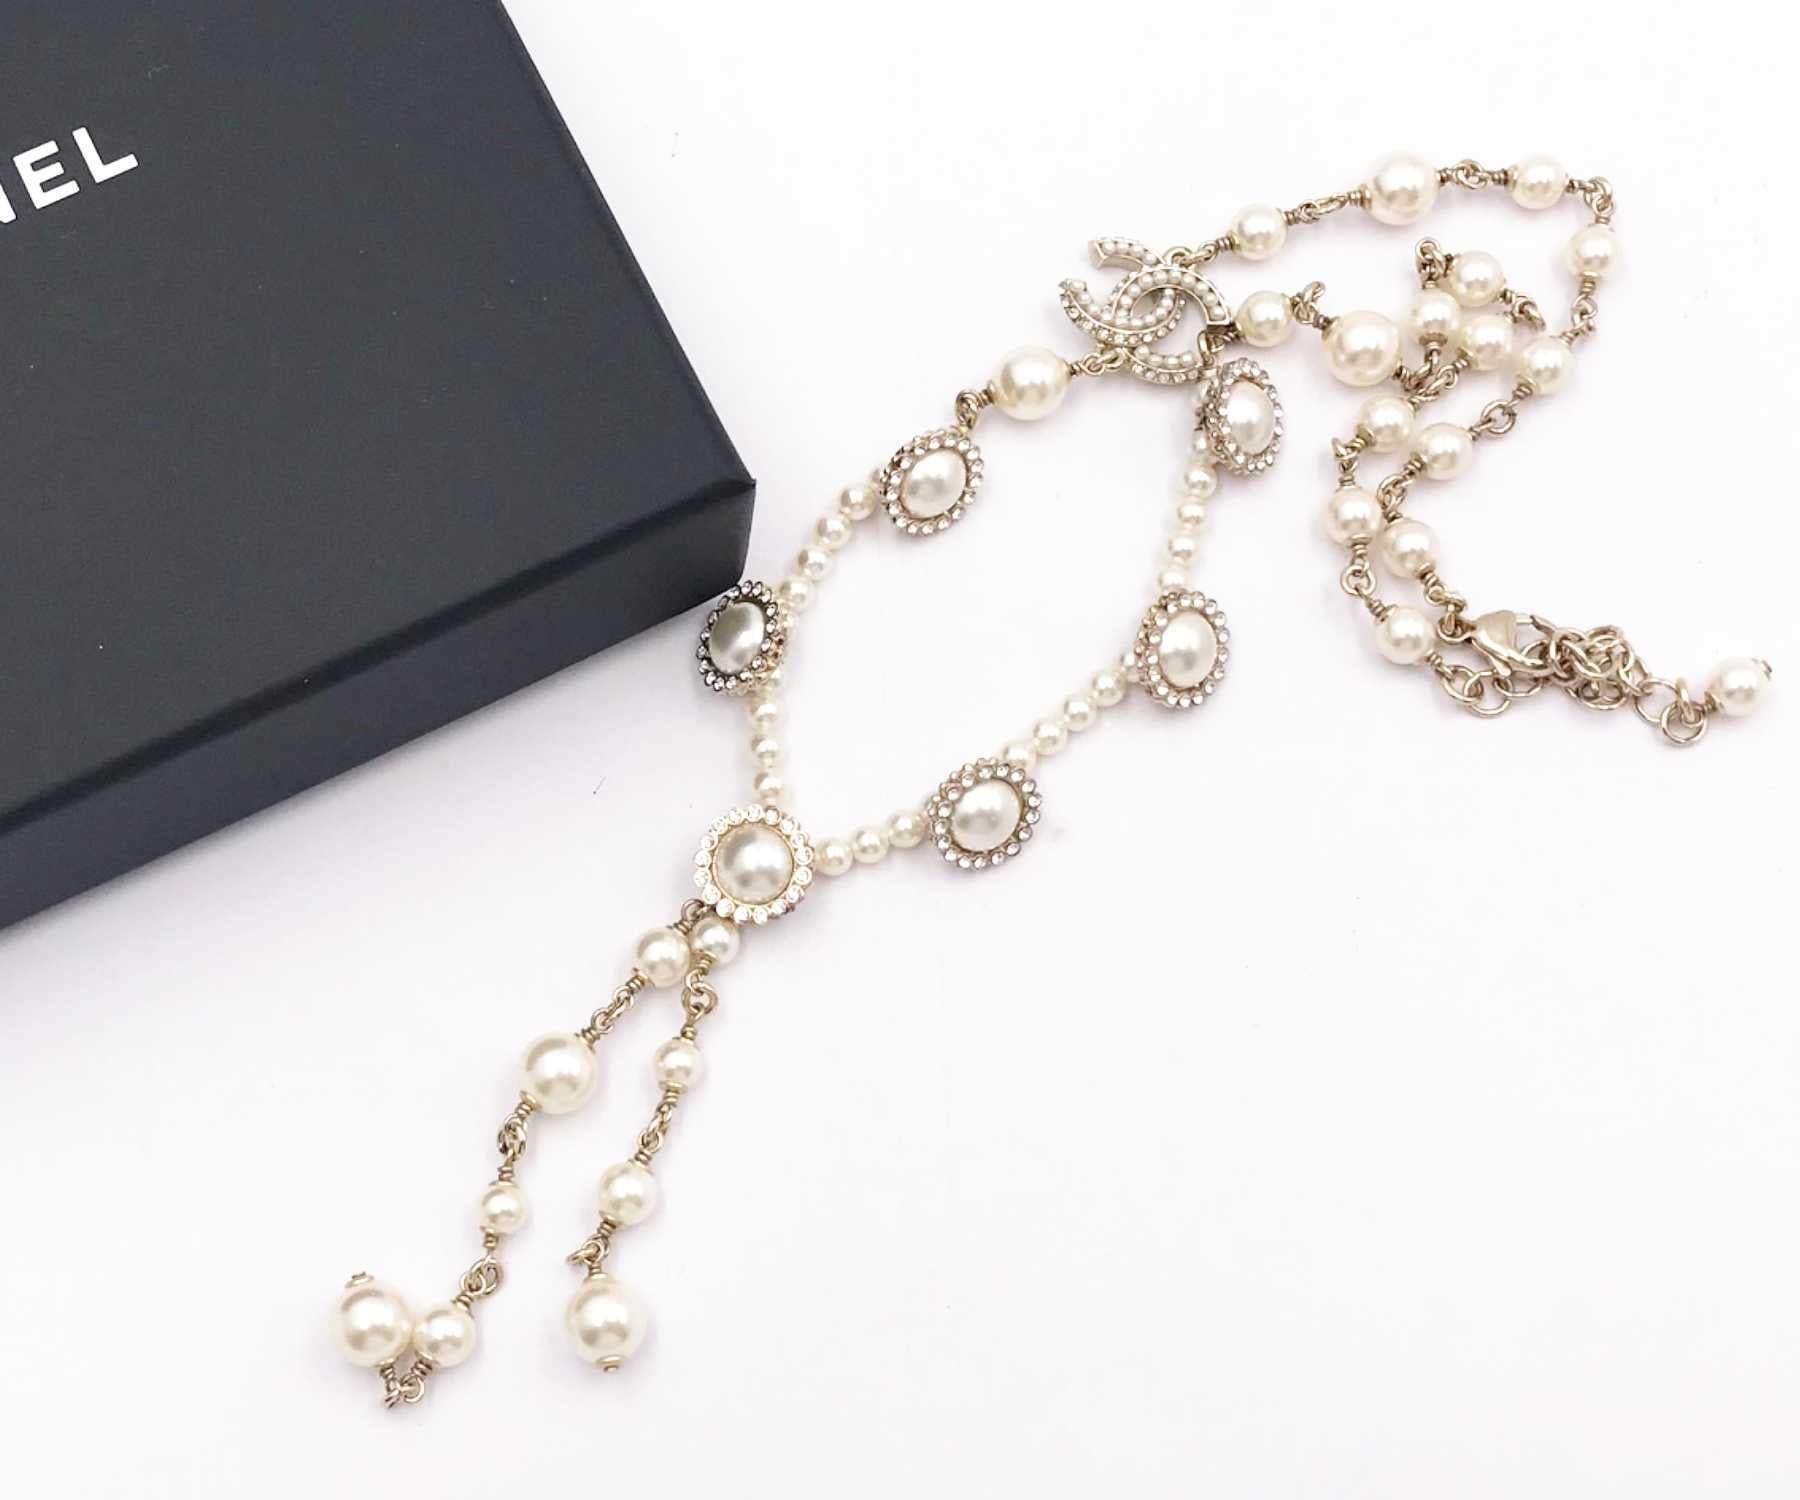 Chanel Gold CC Faux Pearl Drop Necklace

*Marked 16
*Made in France
*Comes with the original box and pouch

-It is approximately 17